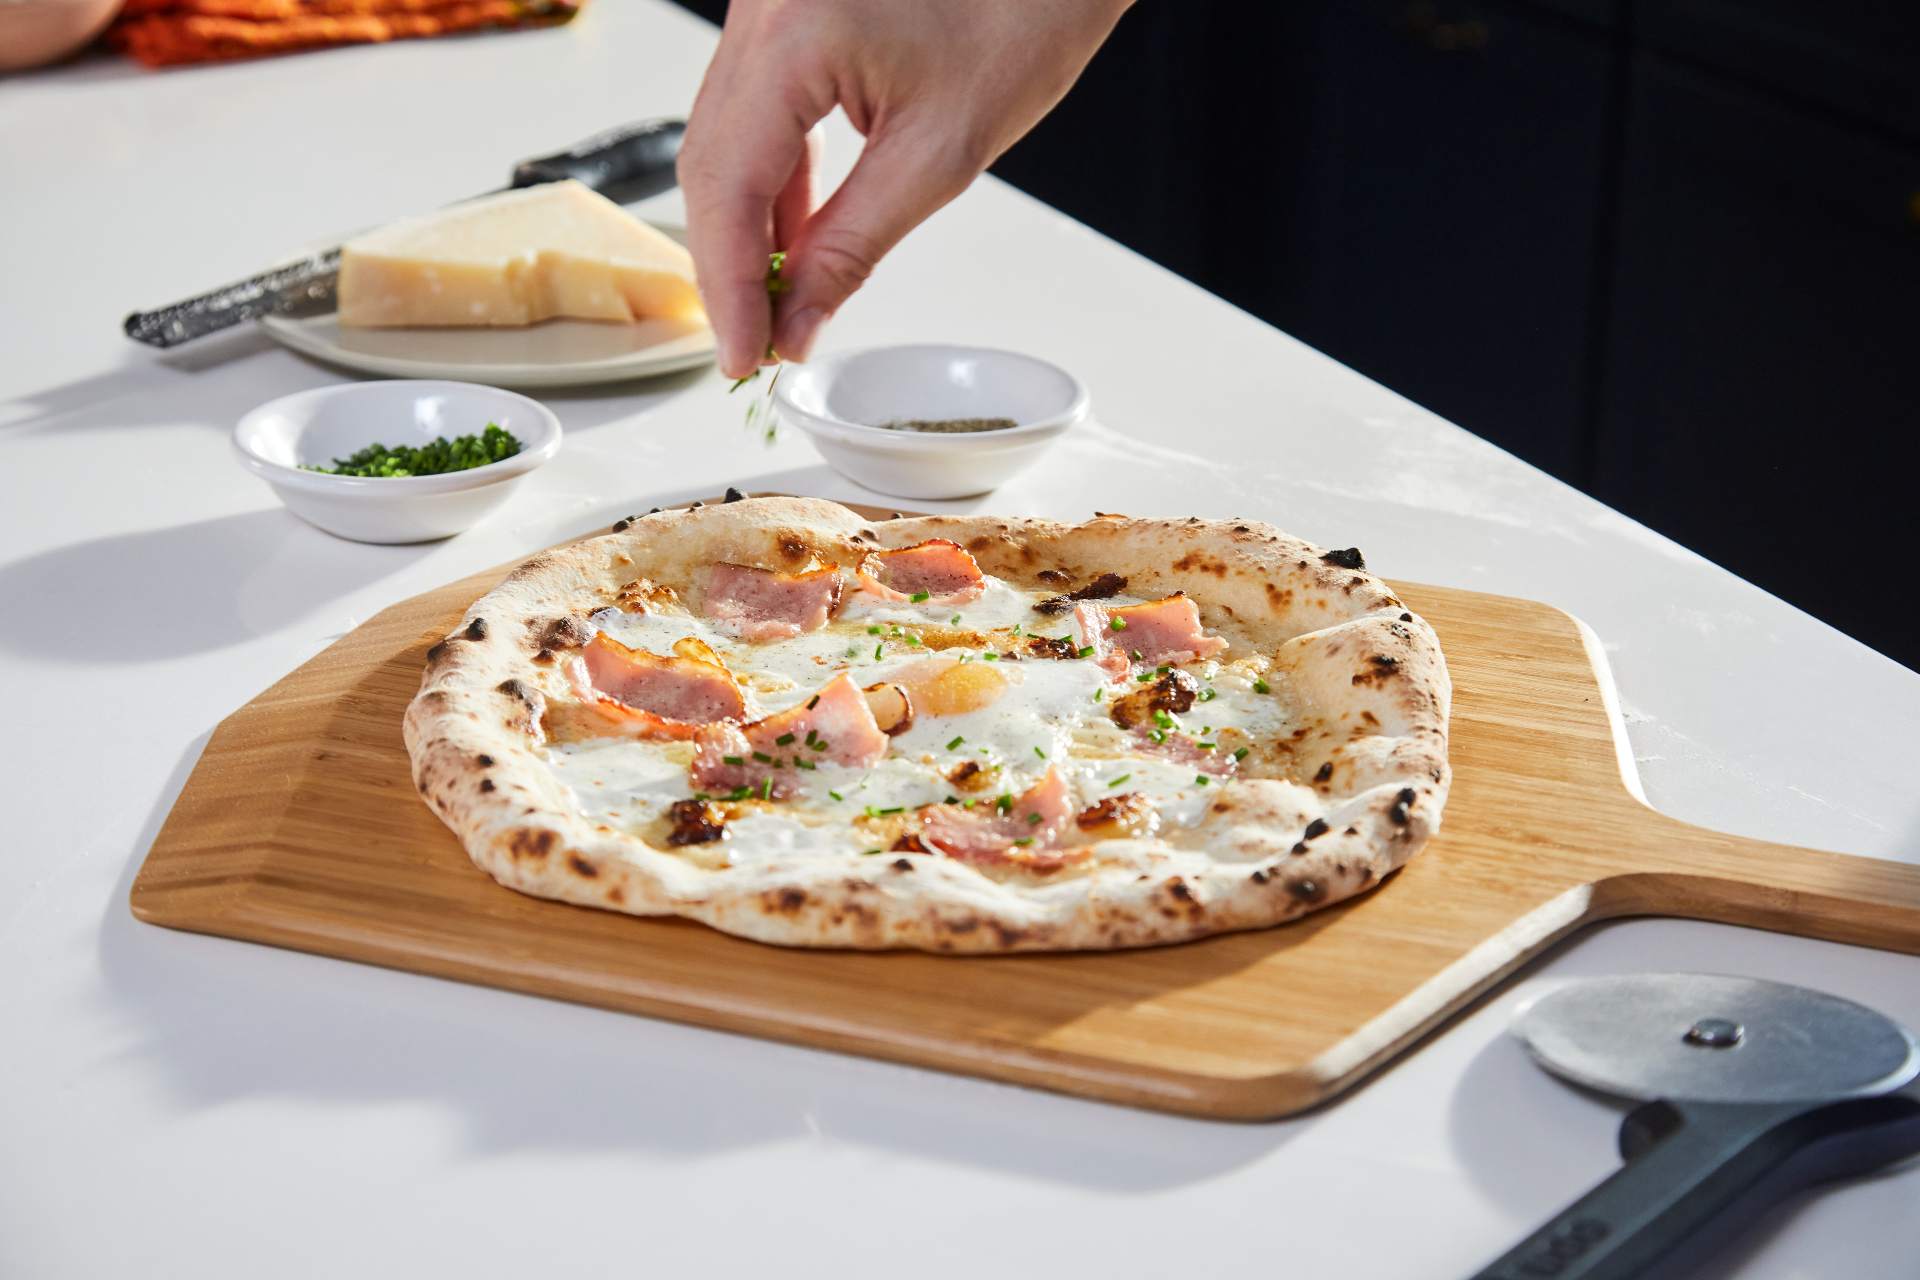 A pizza topped with bacon, eggs and cheese being topped with fresh herbs